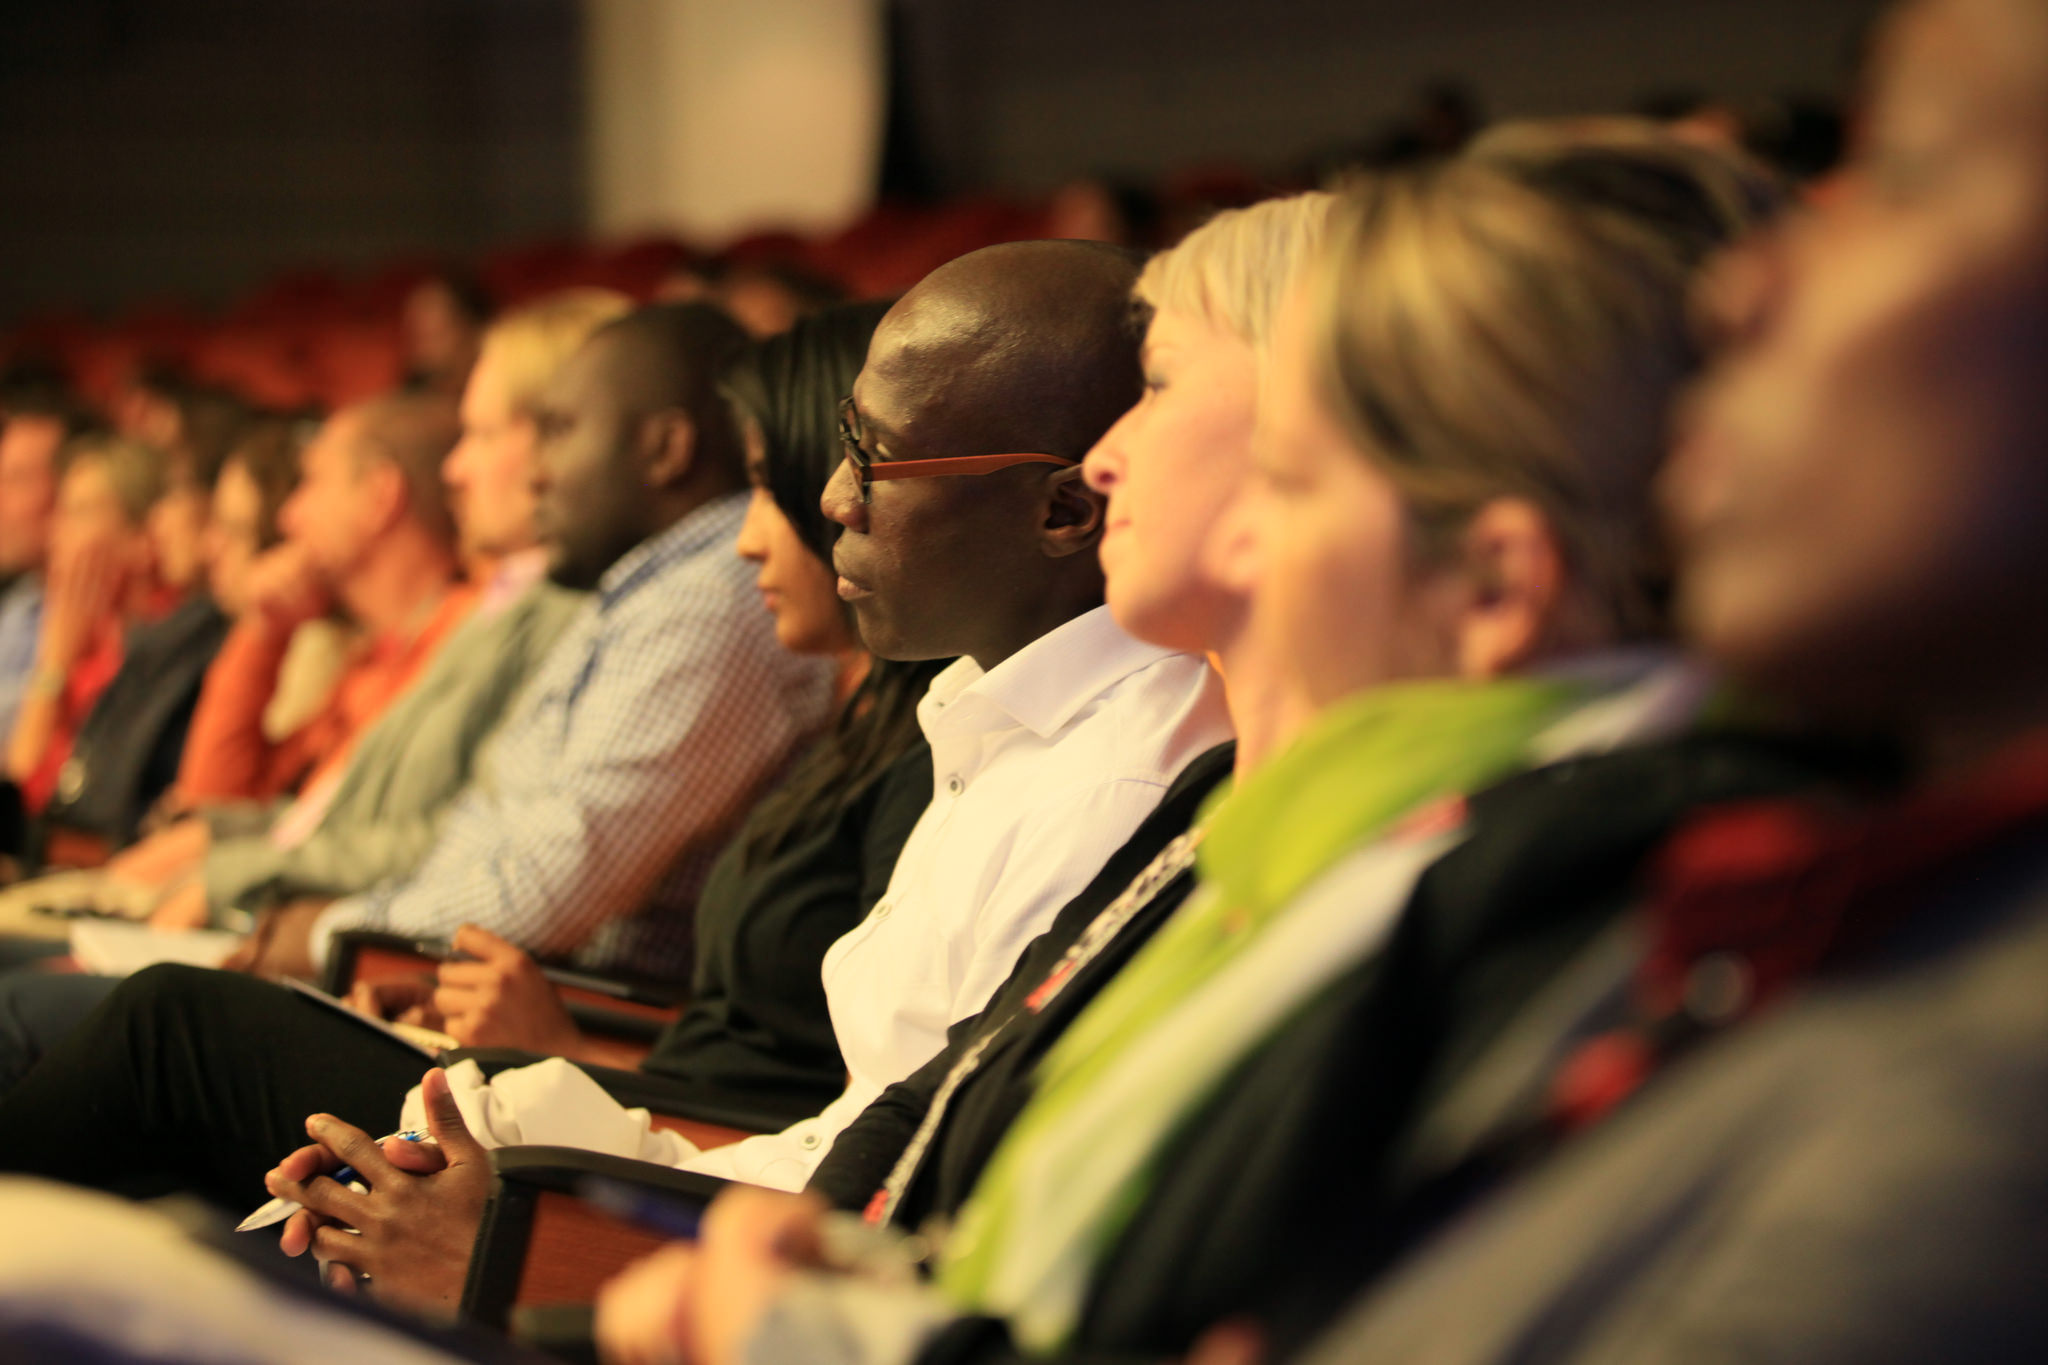 The audience at TEDxJohannesburg sites rapt during a talk. Photo: TEDxJoahnnesburg